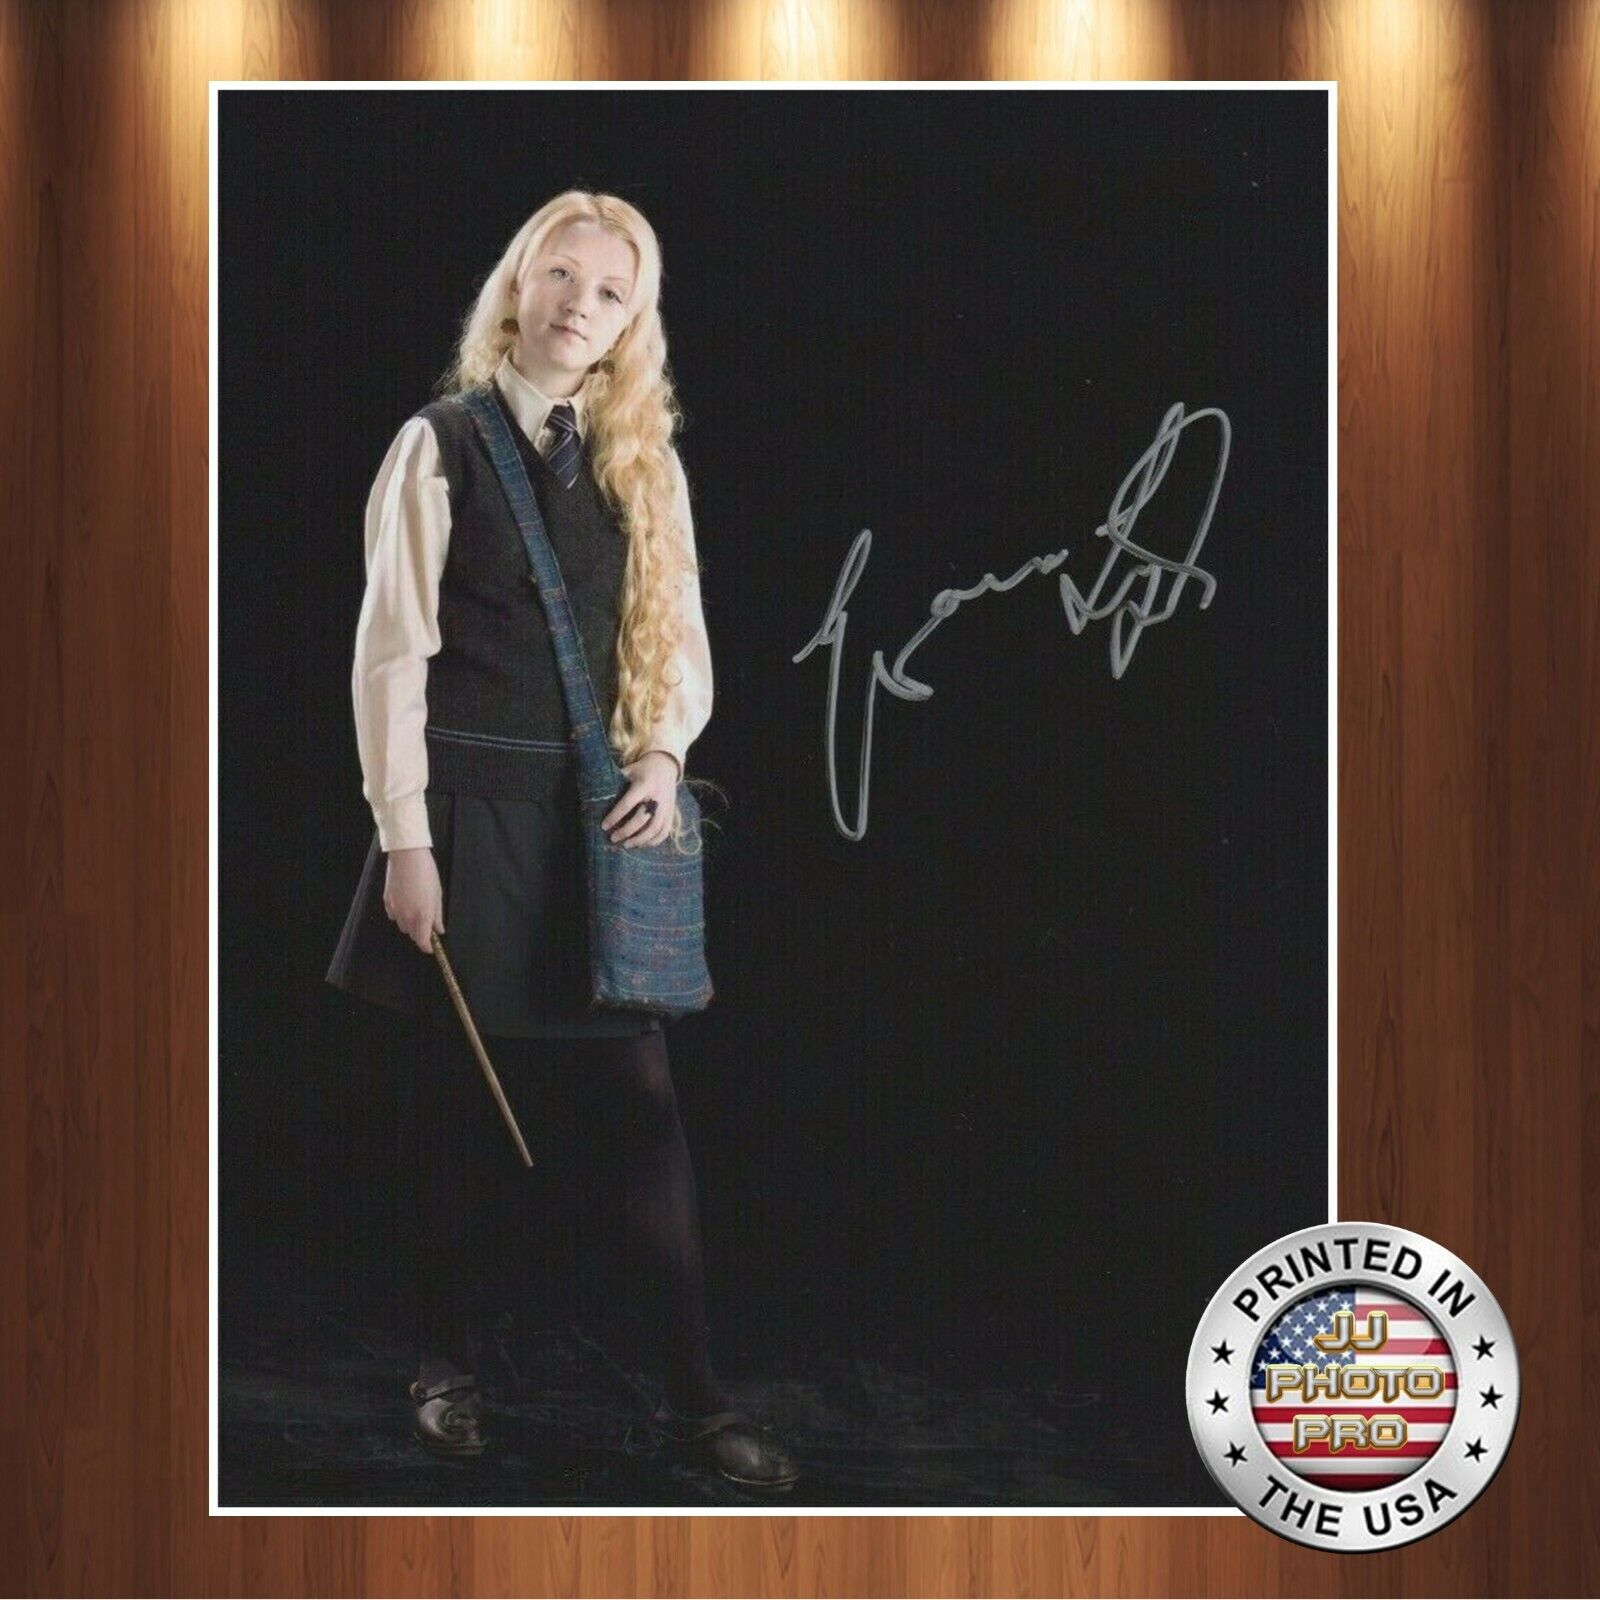 Evanna Lynch Autographed Signed 8x10 Photo Poster painting (Harry Potter) REPRINT